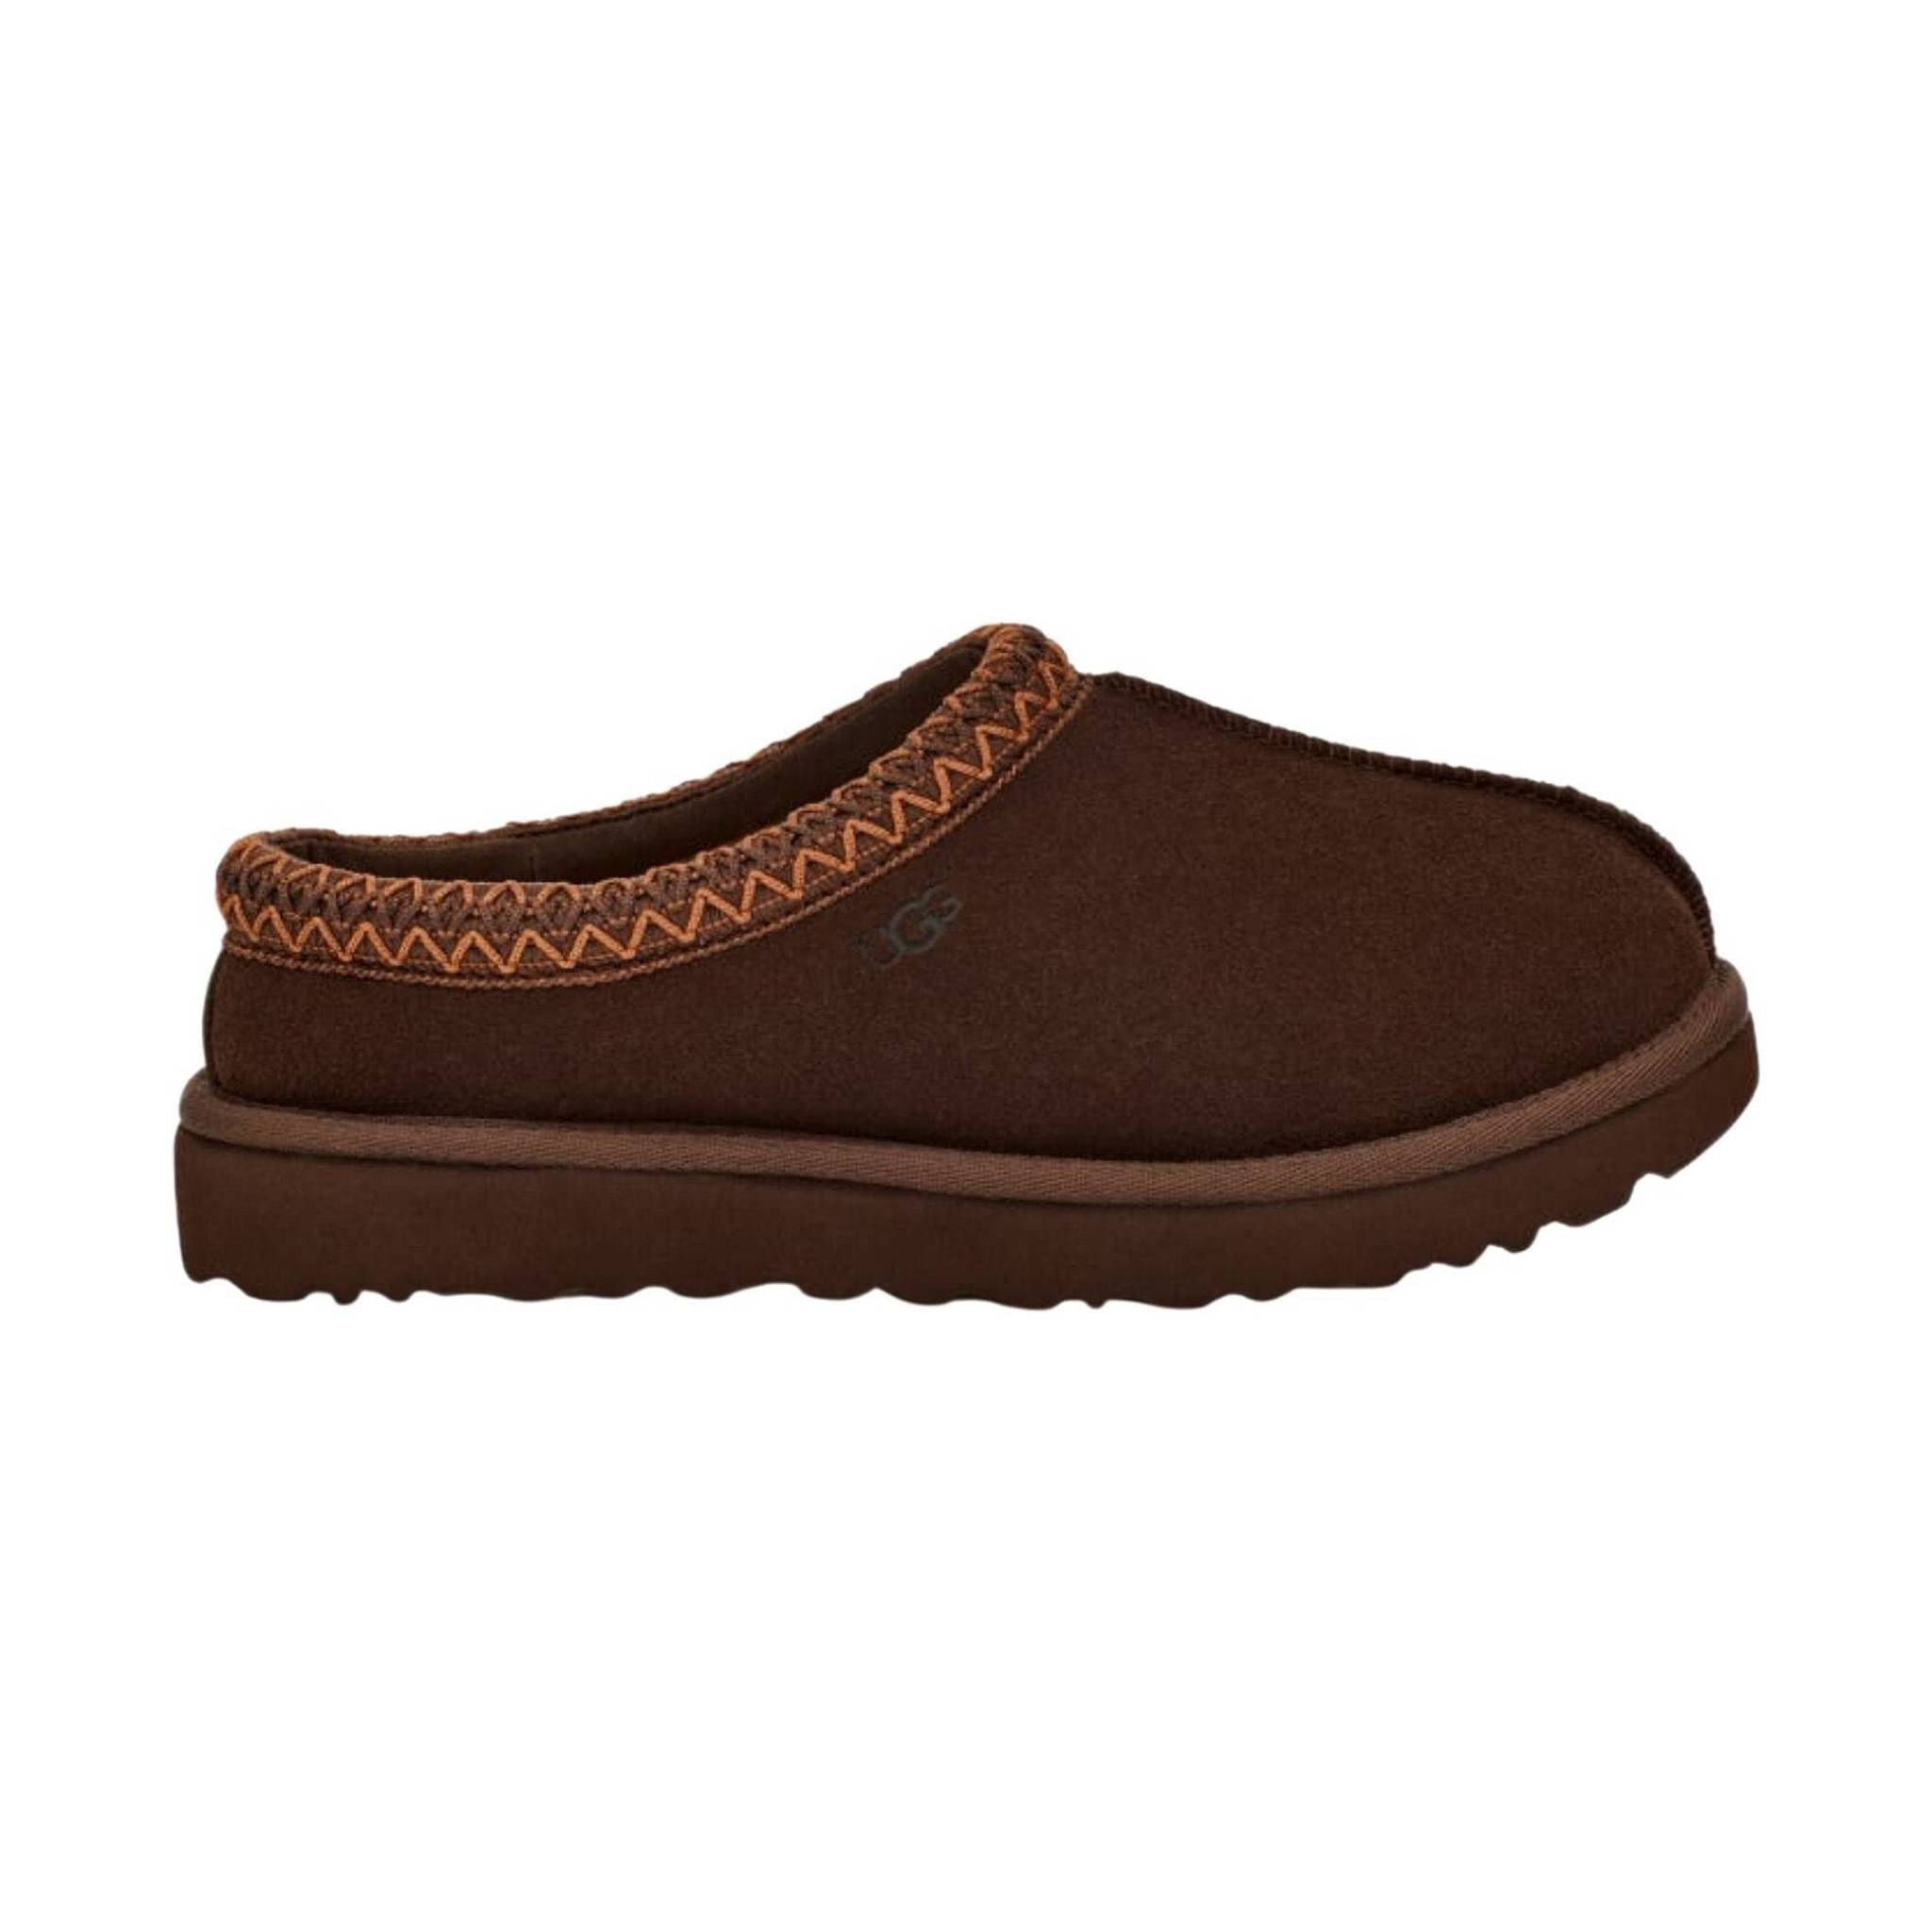 UGG Women's Tazzle Suede Slippers - Chestnut